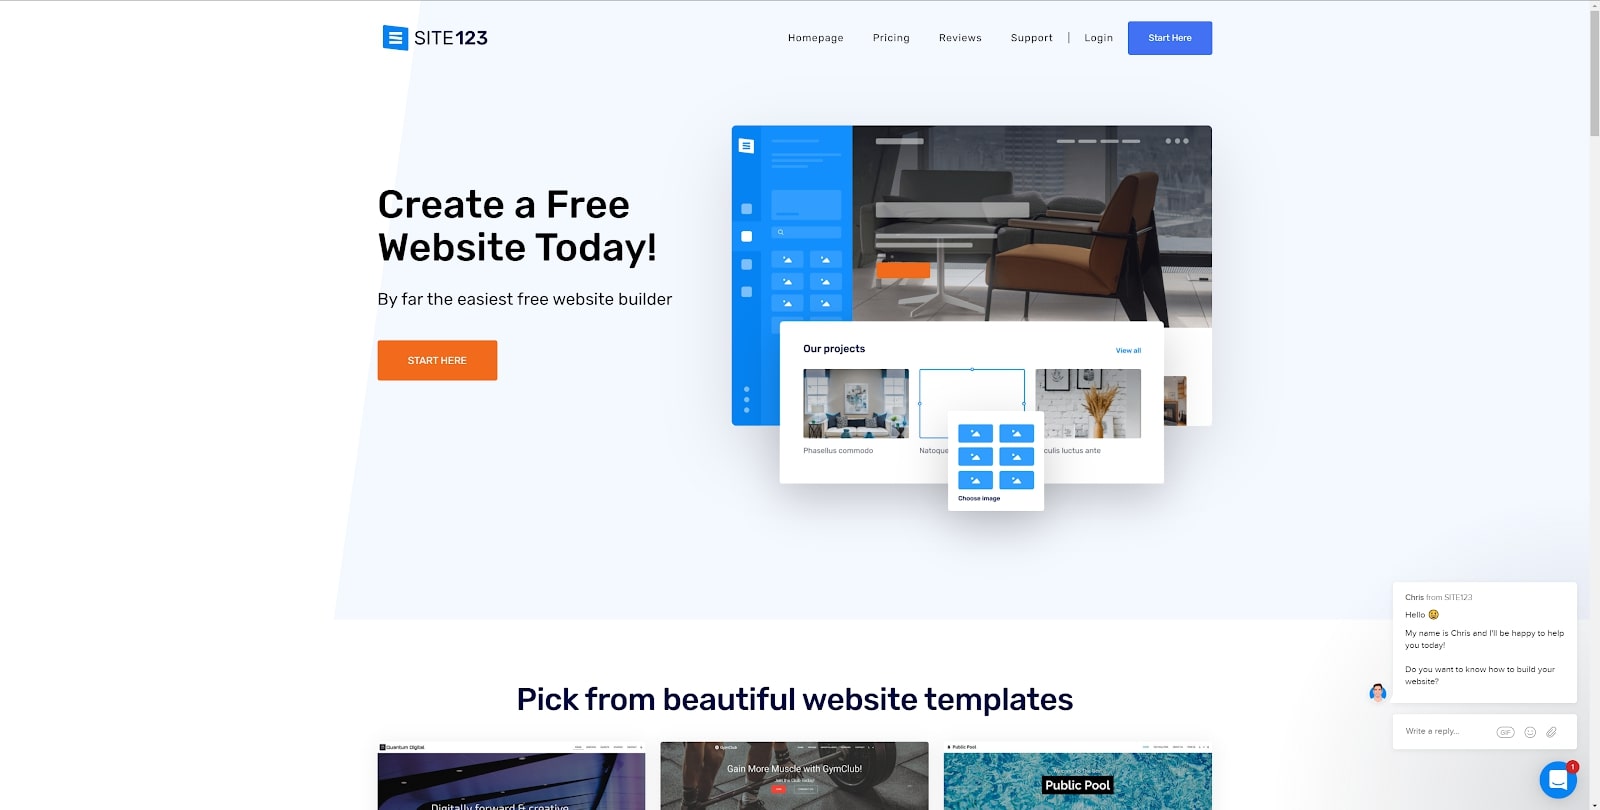 A screenshot from Site123, one of the best free website builders